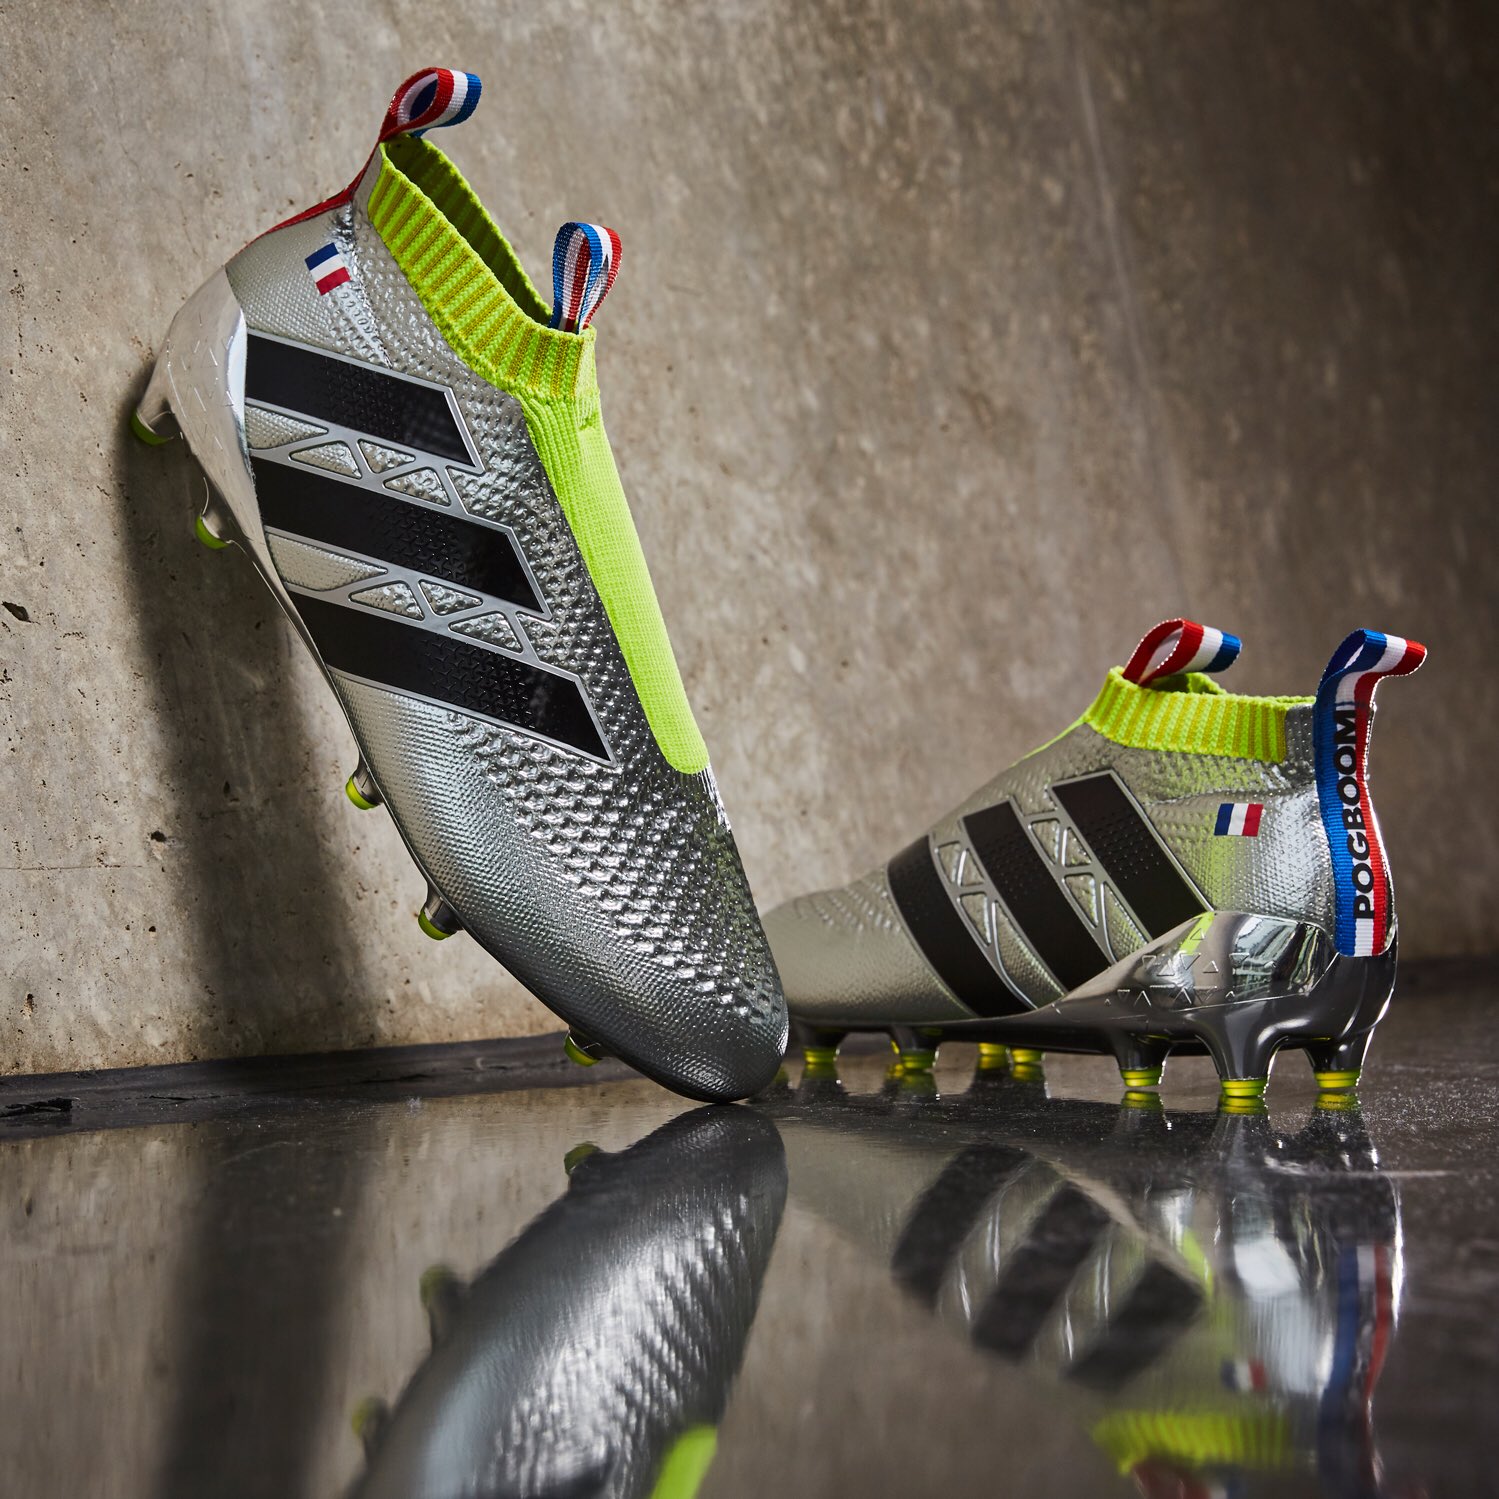 Adidas Unveils Special Euro 2016 Ace PureControl Boots for Paul Pogba - Footy